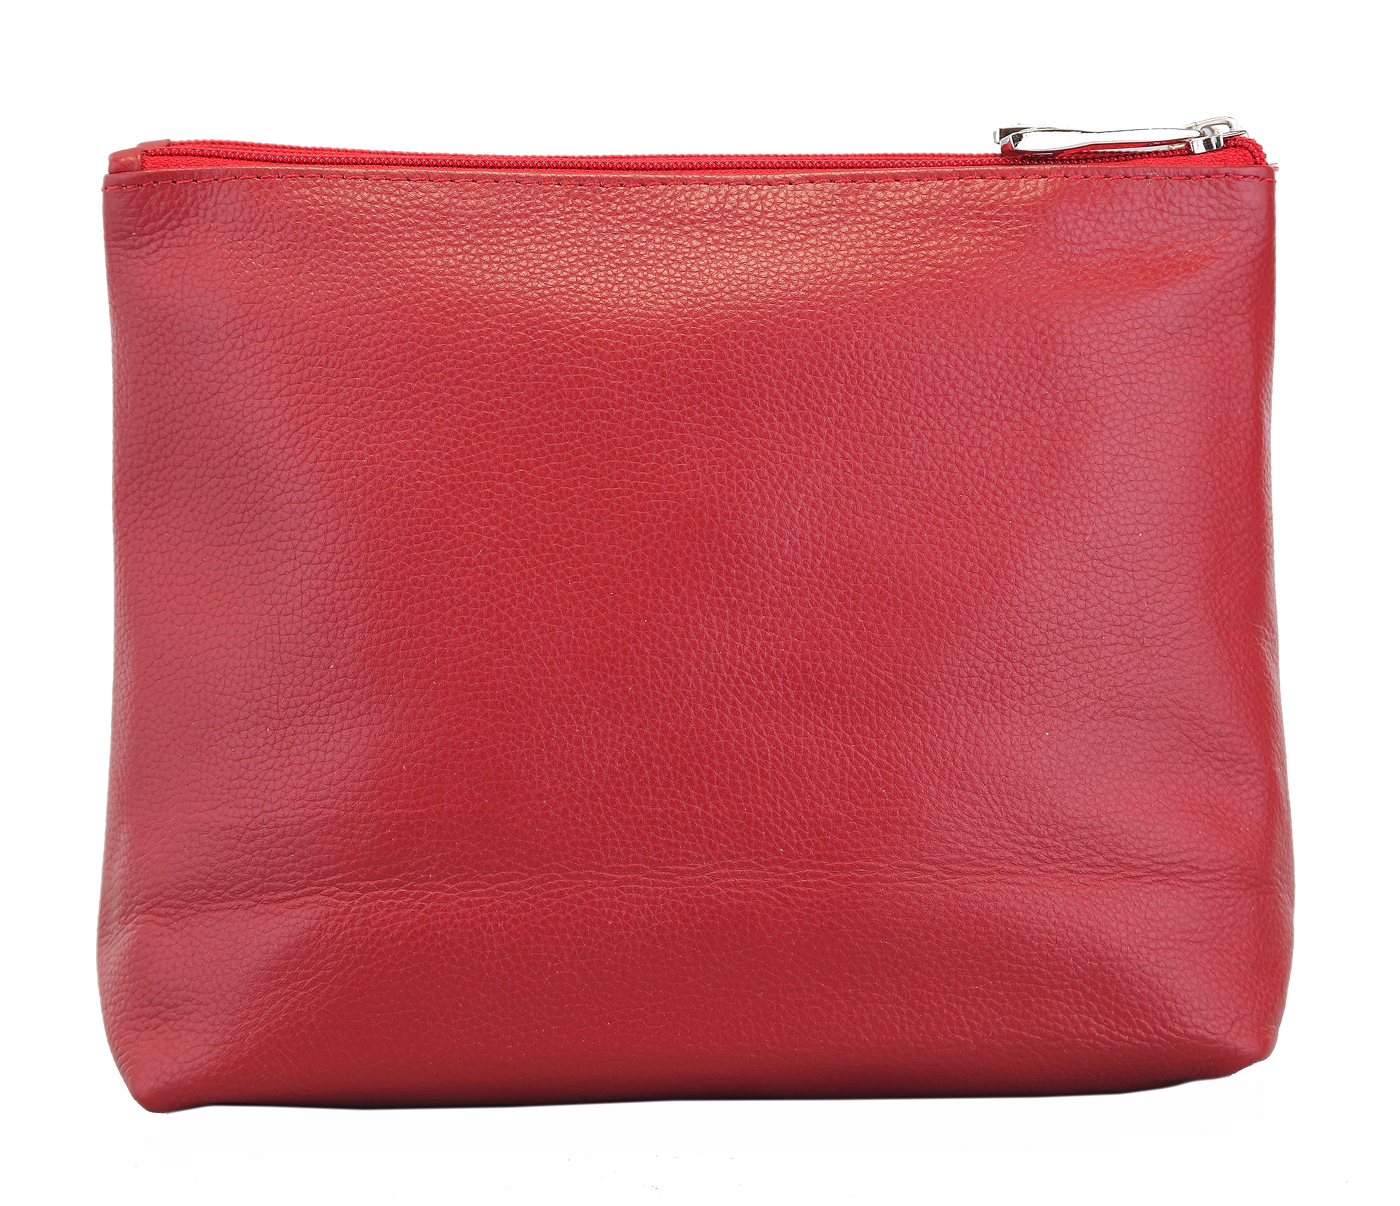 P18--Unisex Wash And Toiletry Bag in Genuine Leather - Red